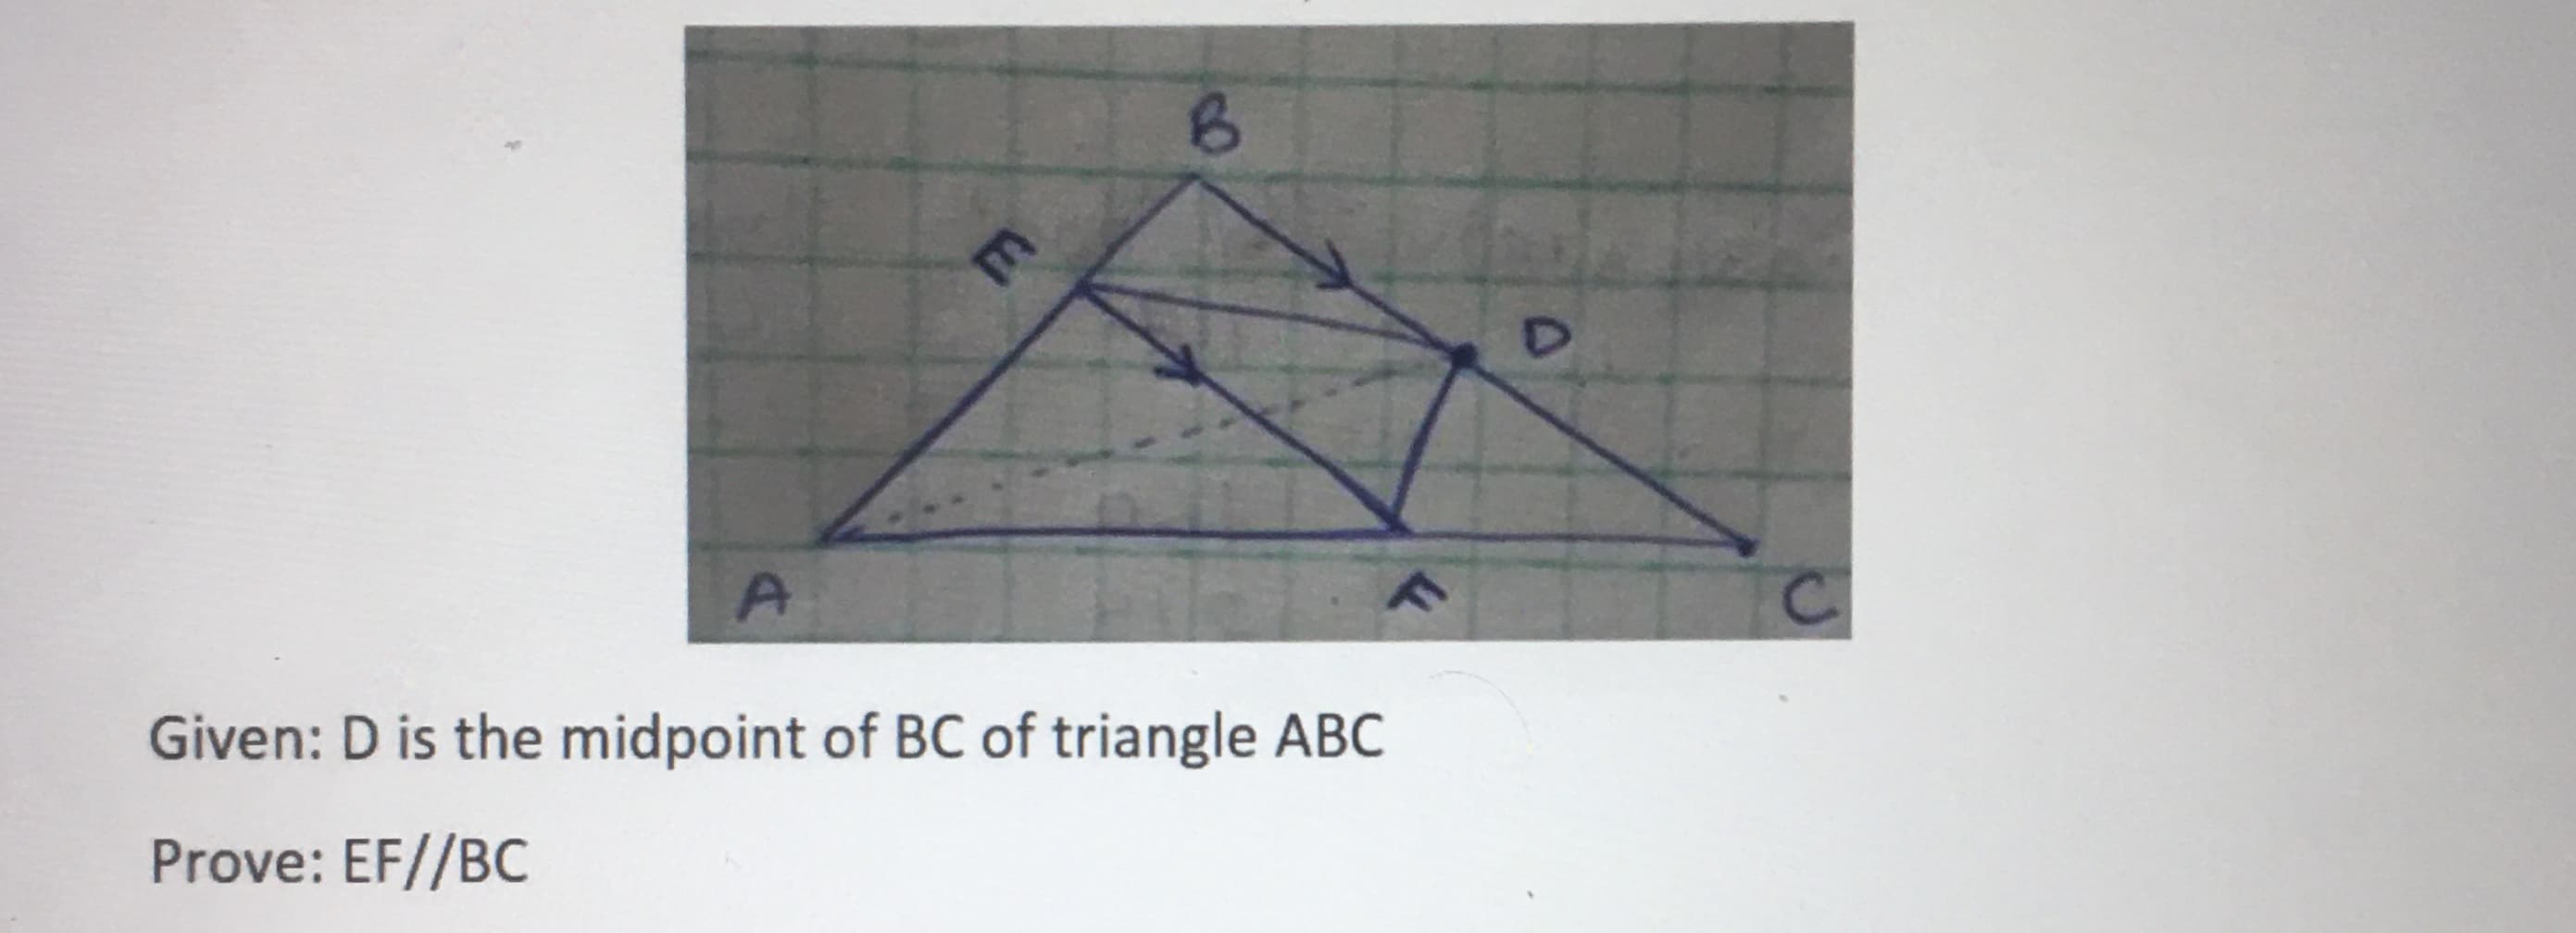 A.
C.
Given: D is the midpoint of BC of triangle ABC
Prove: EF//BC
E.
